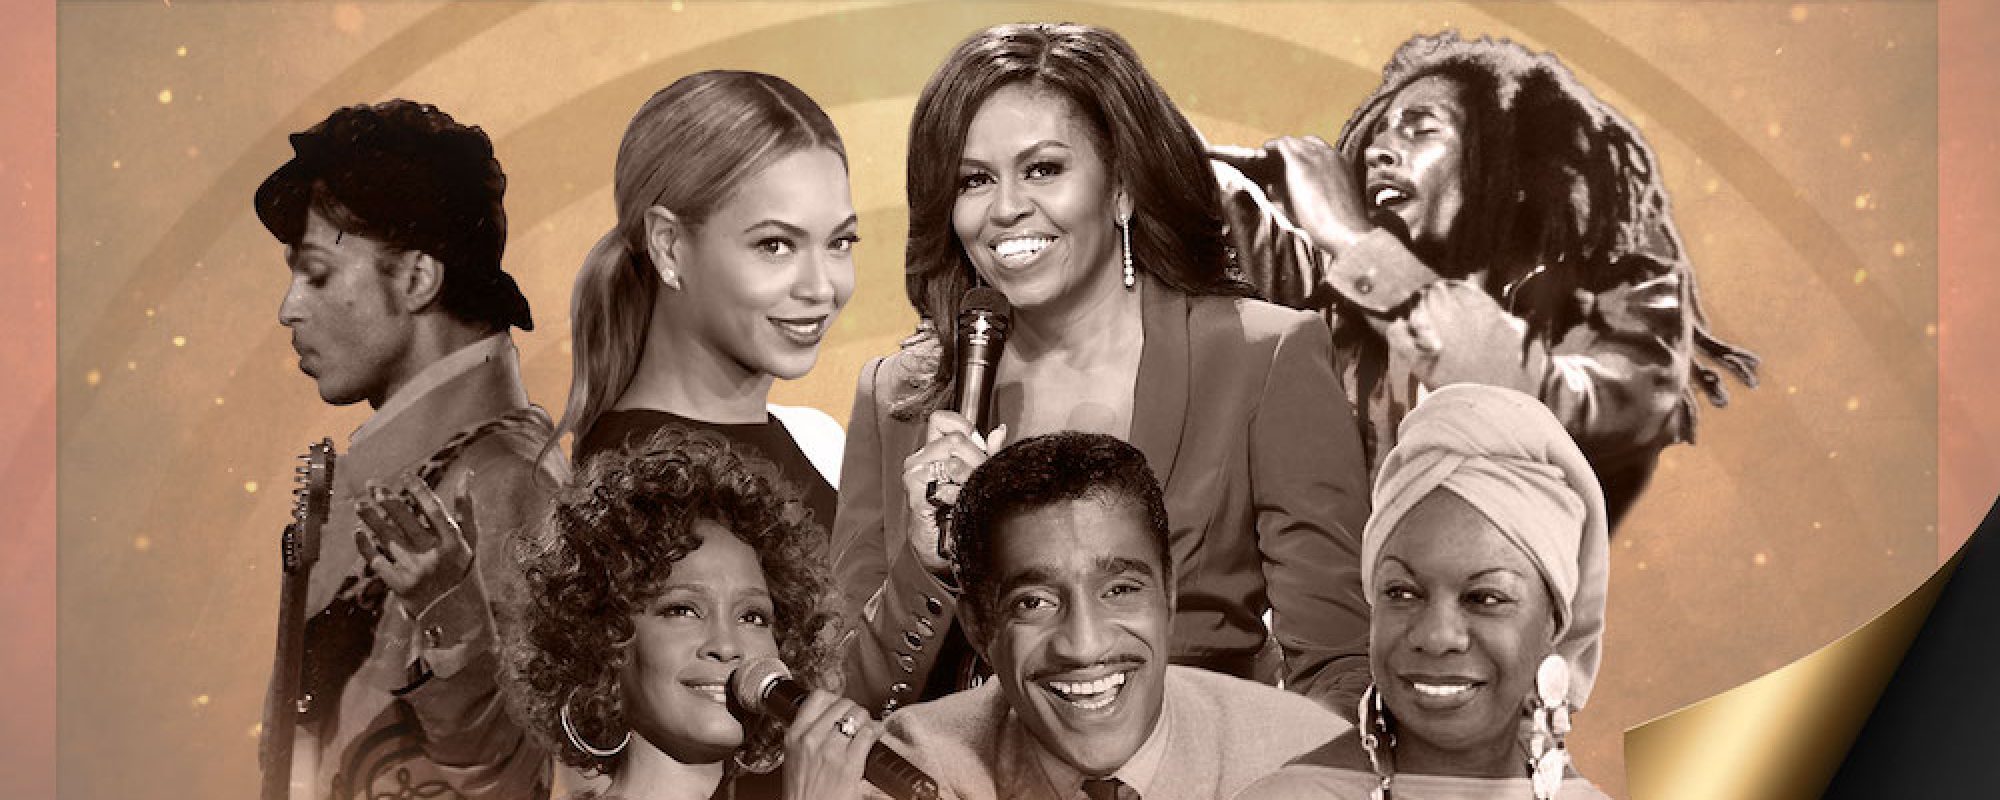 OVATION TV CELEBRATES BLACK ARTISTS AND ARTISTRY WITH PUBLIC SERVICE ANNOUNCEMENTS AND A CURATED ON-DEMAND PROGRAMMING LINEUP DURING BLACK HISTORY MONTH 2021